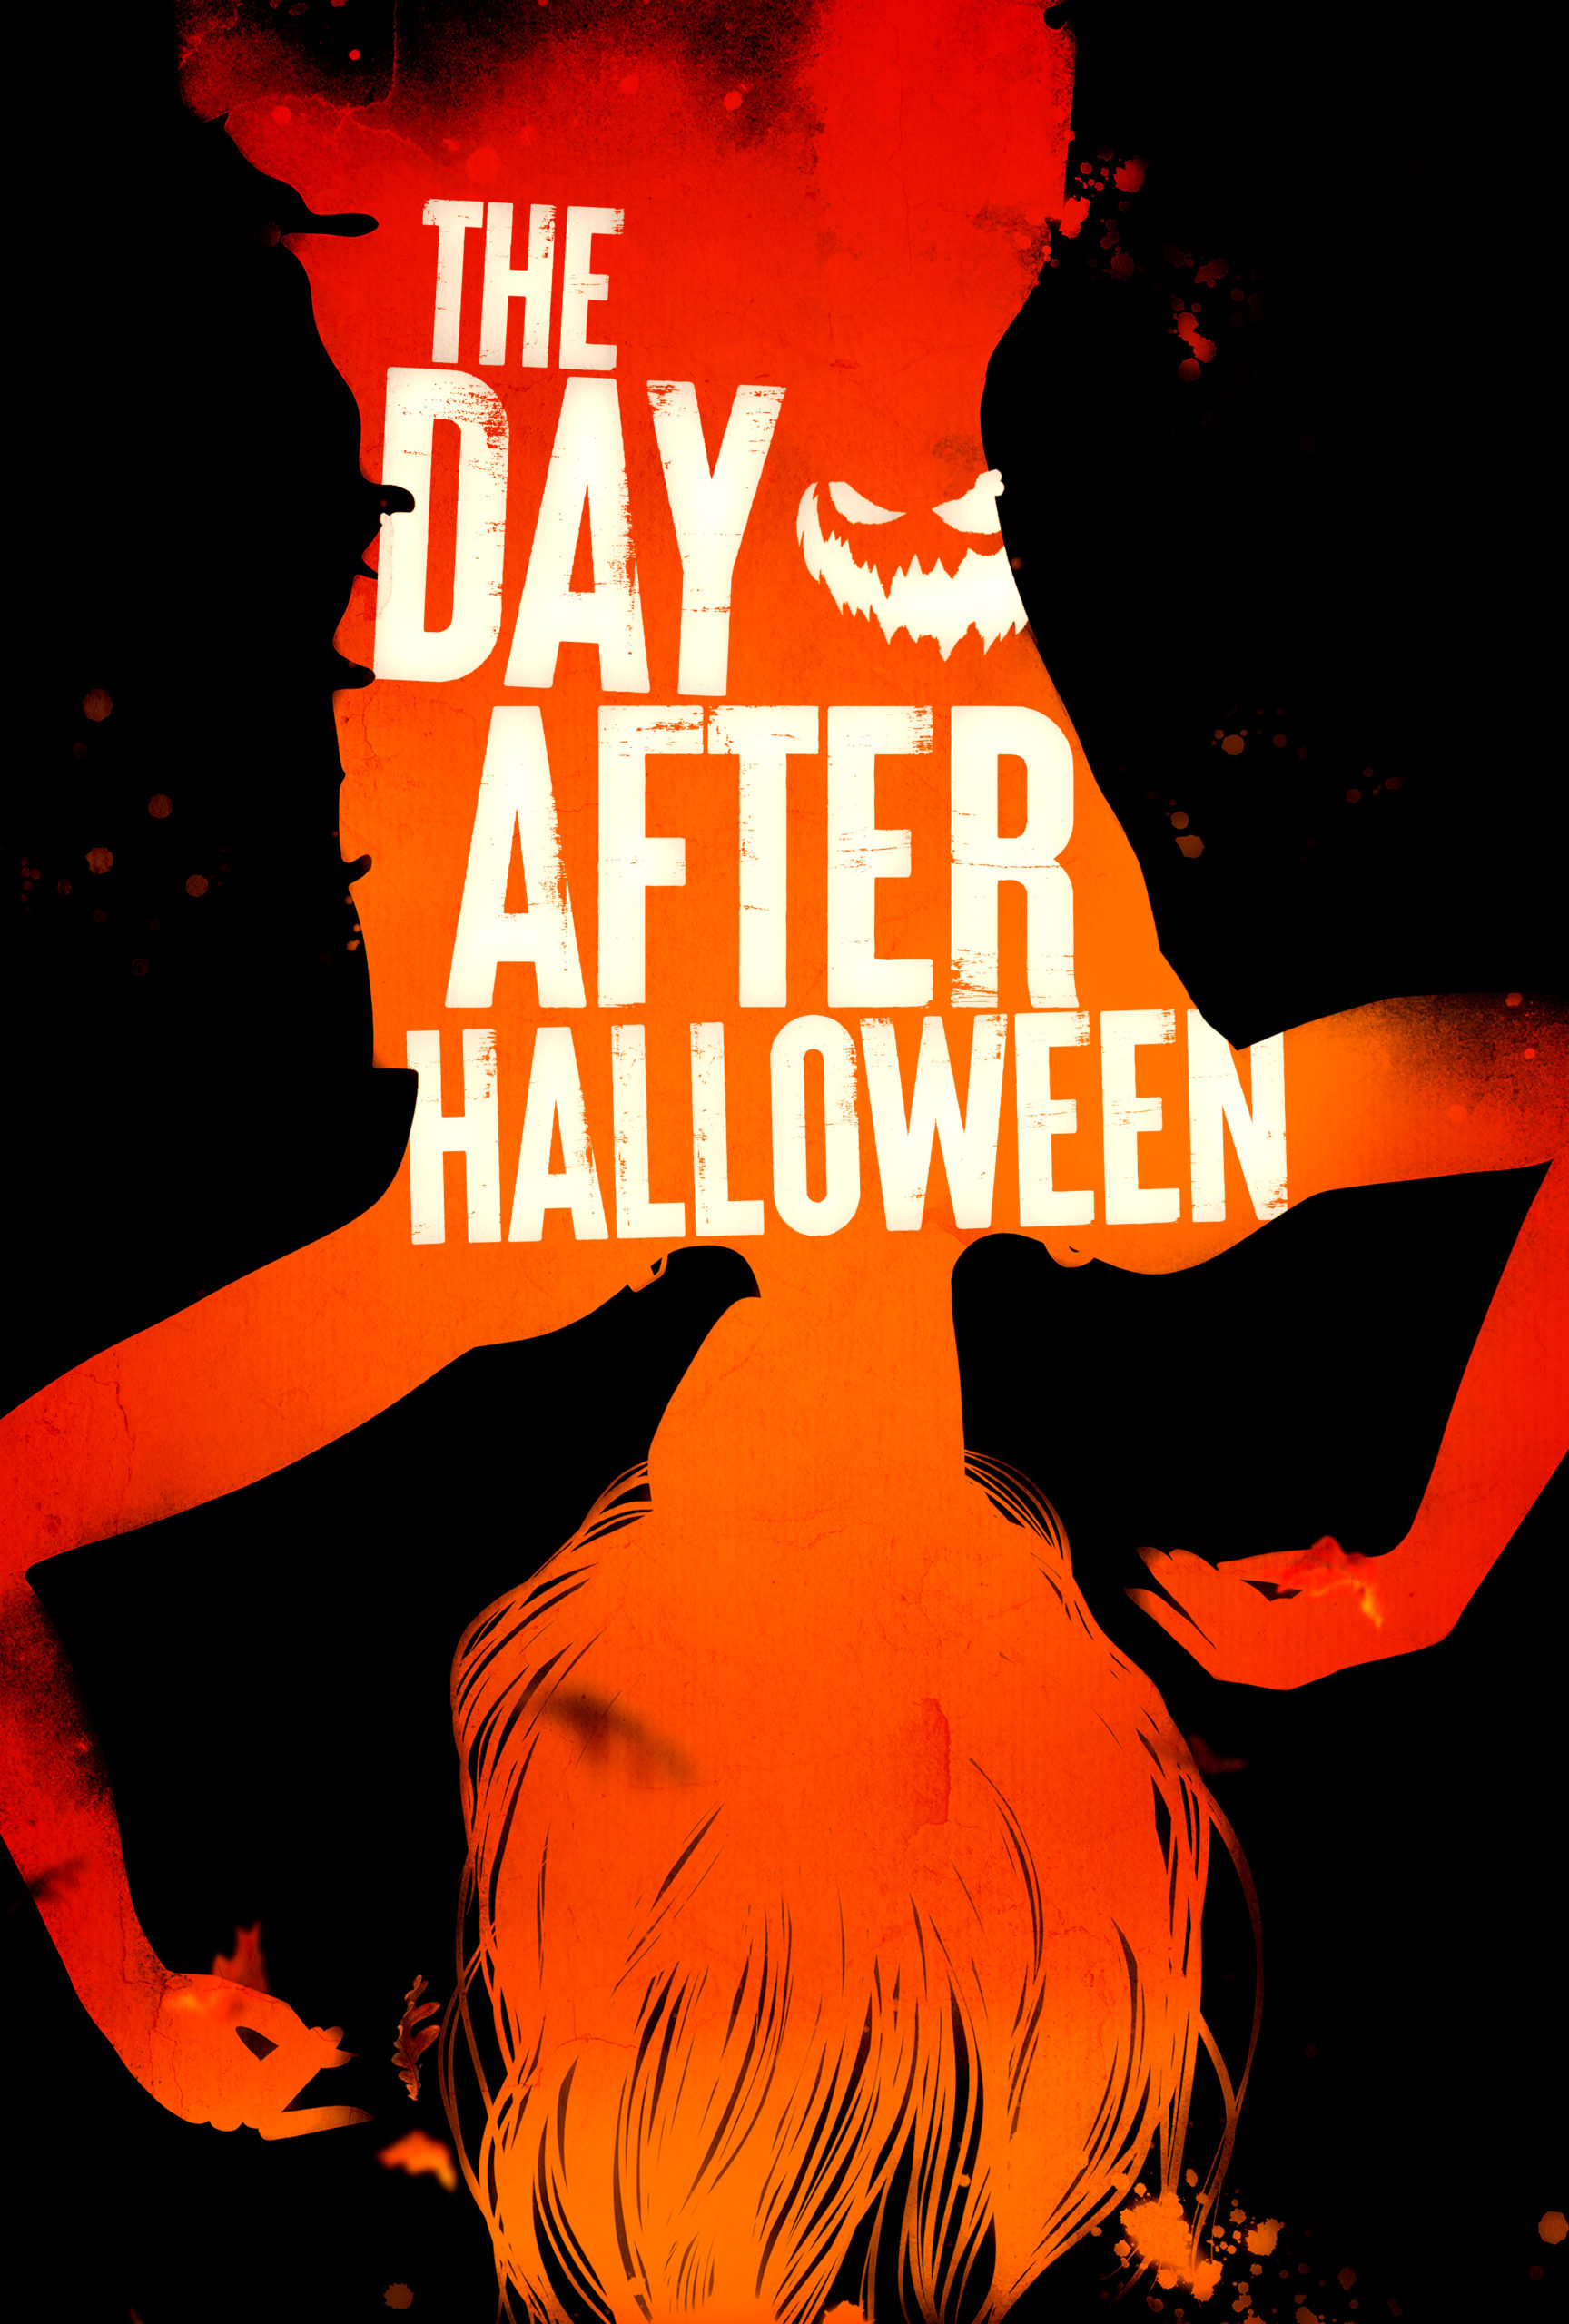 "The Day After Halloween" movie screening IndyHub